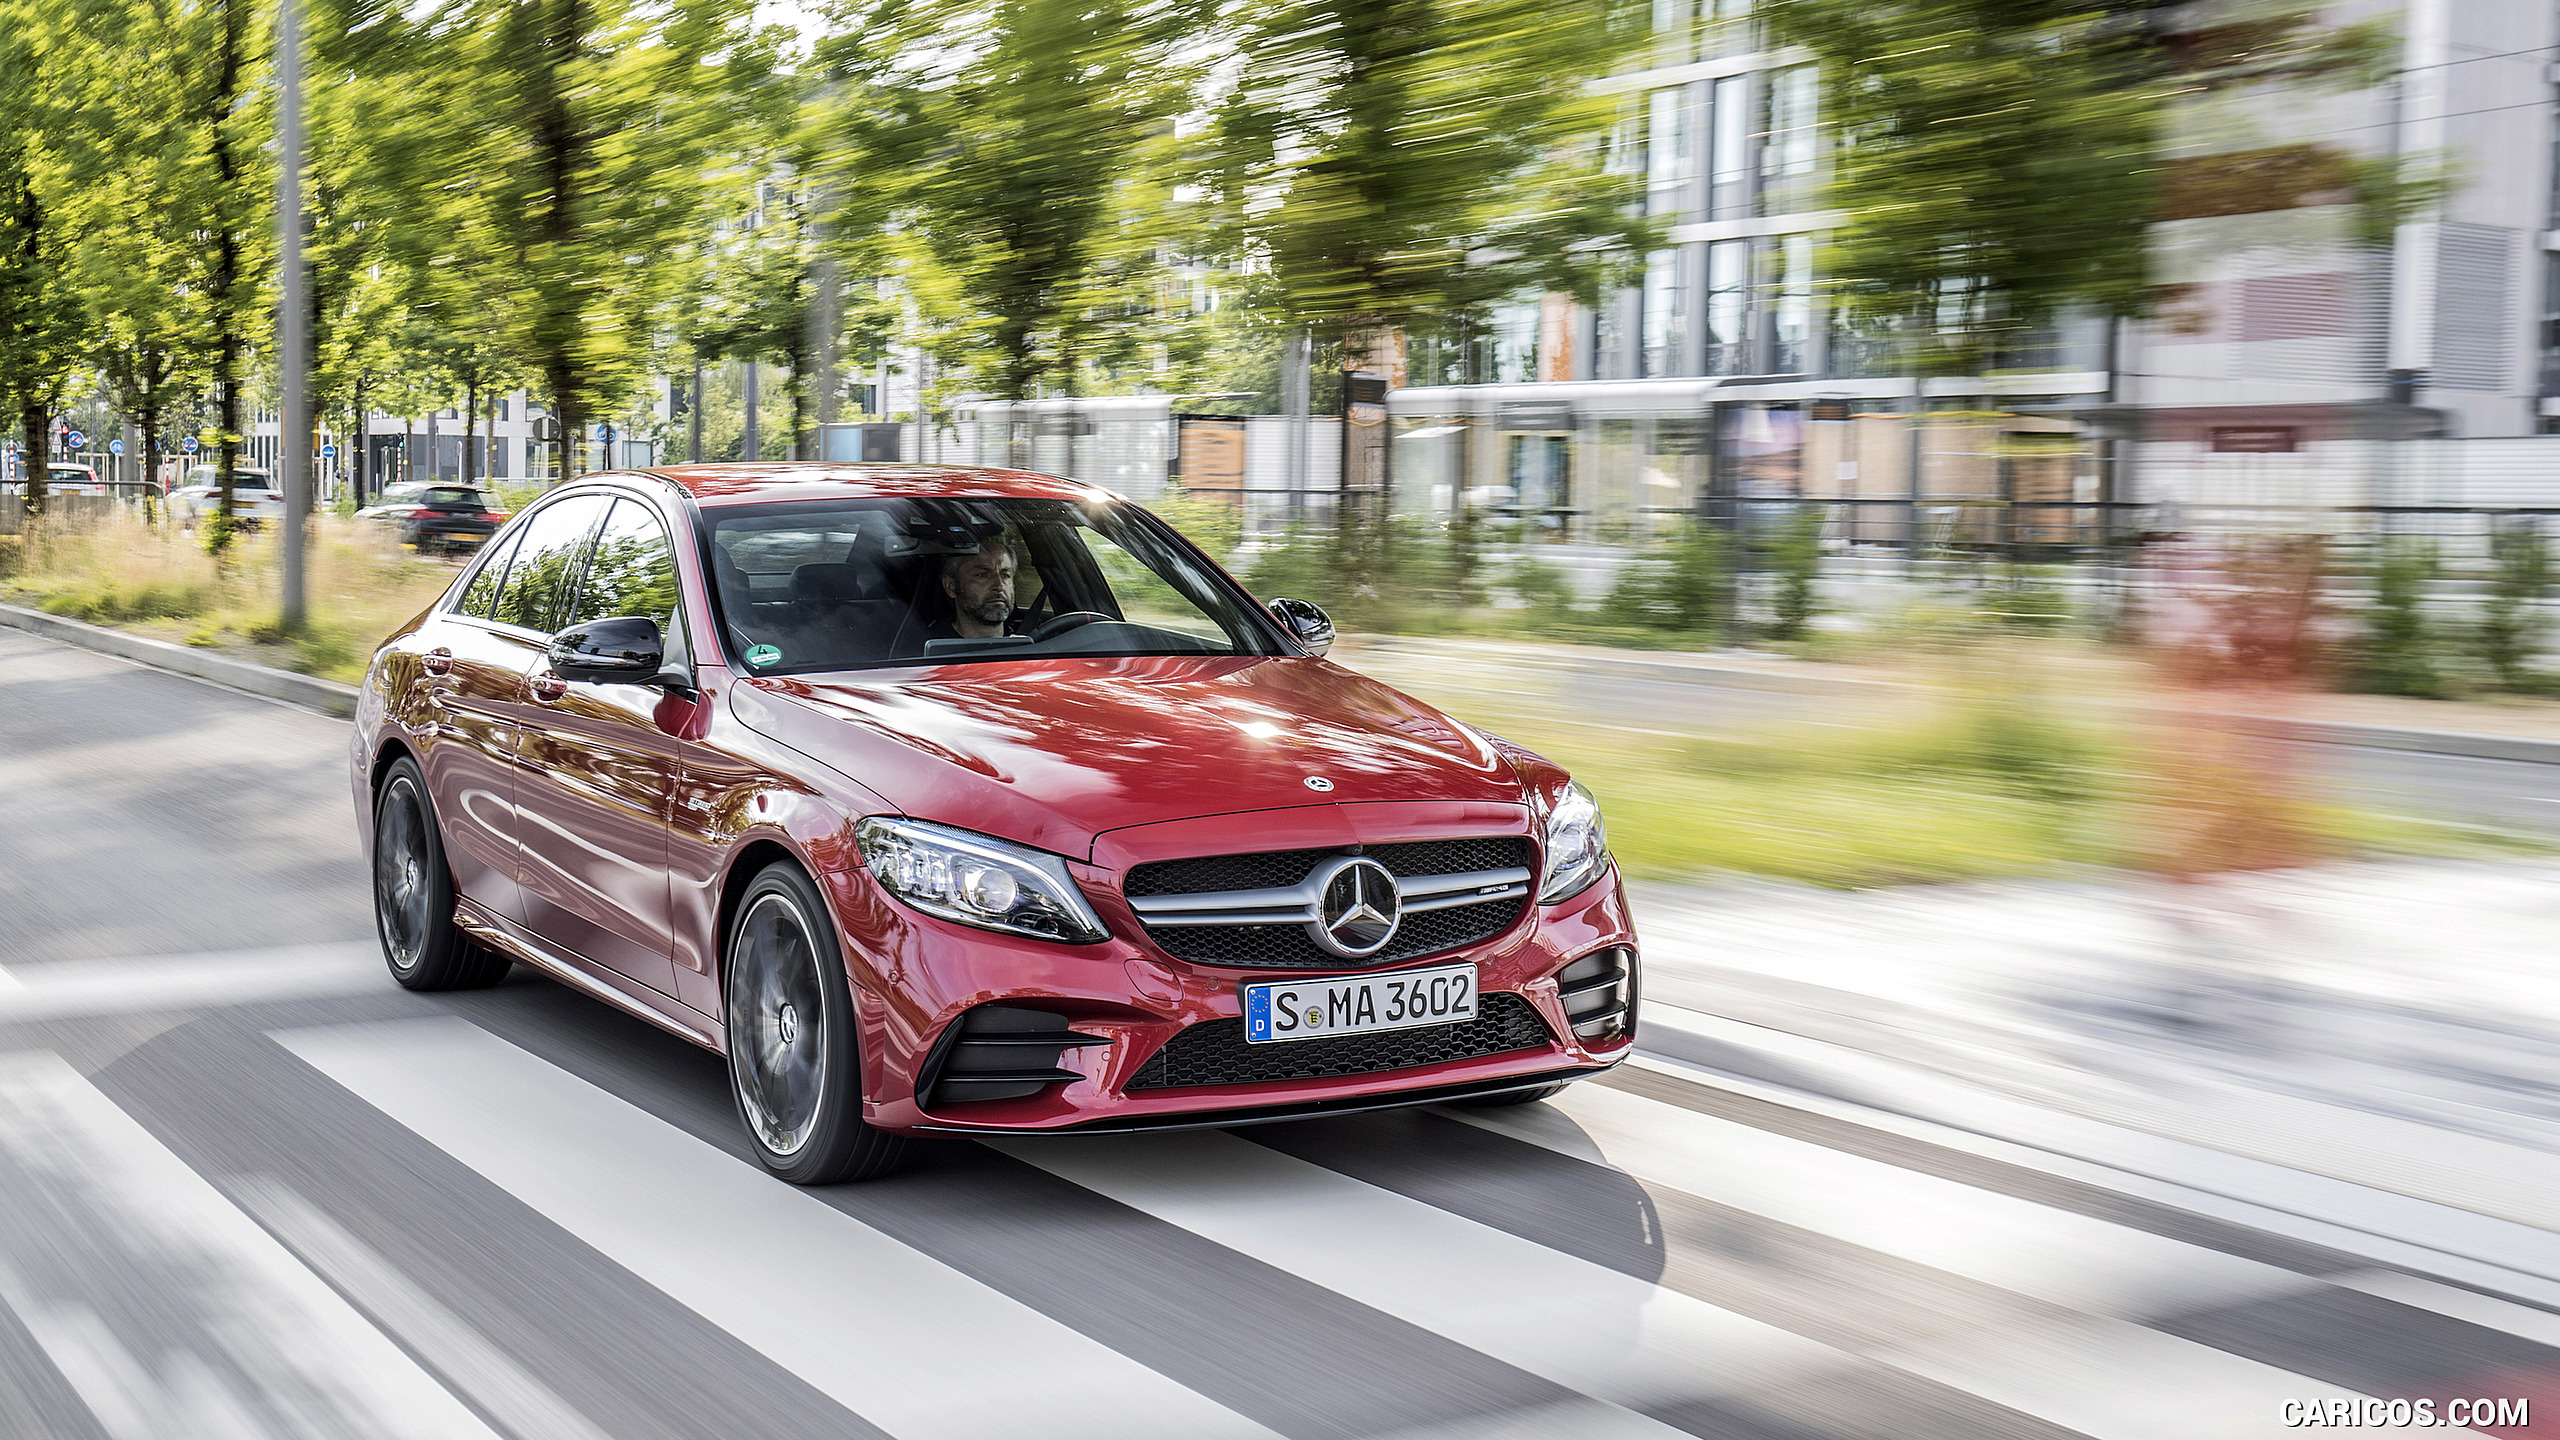 2019 Mercedes-AMG C43 4MATIC Sedan (Color: Hyacinth Red) - Front Three-Quarter, #48 of 192